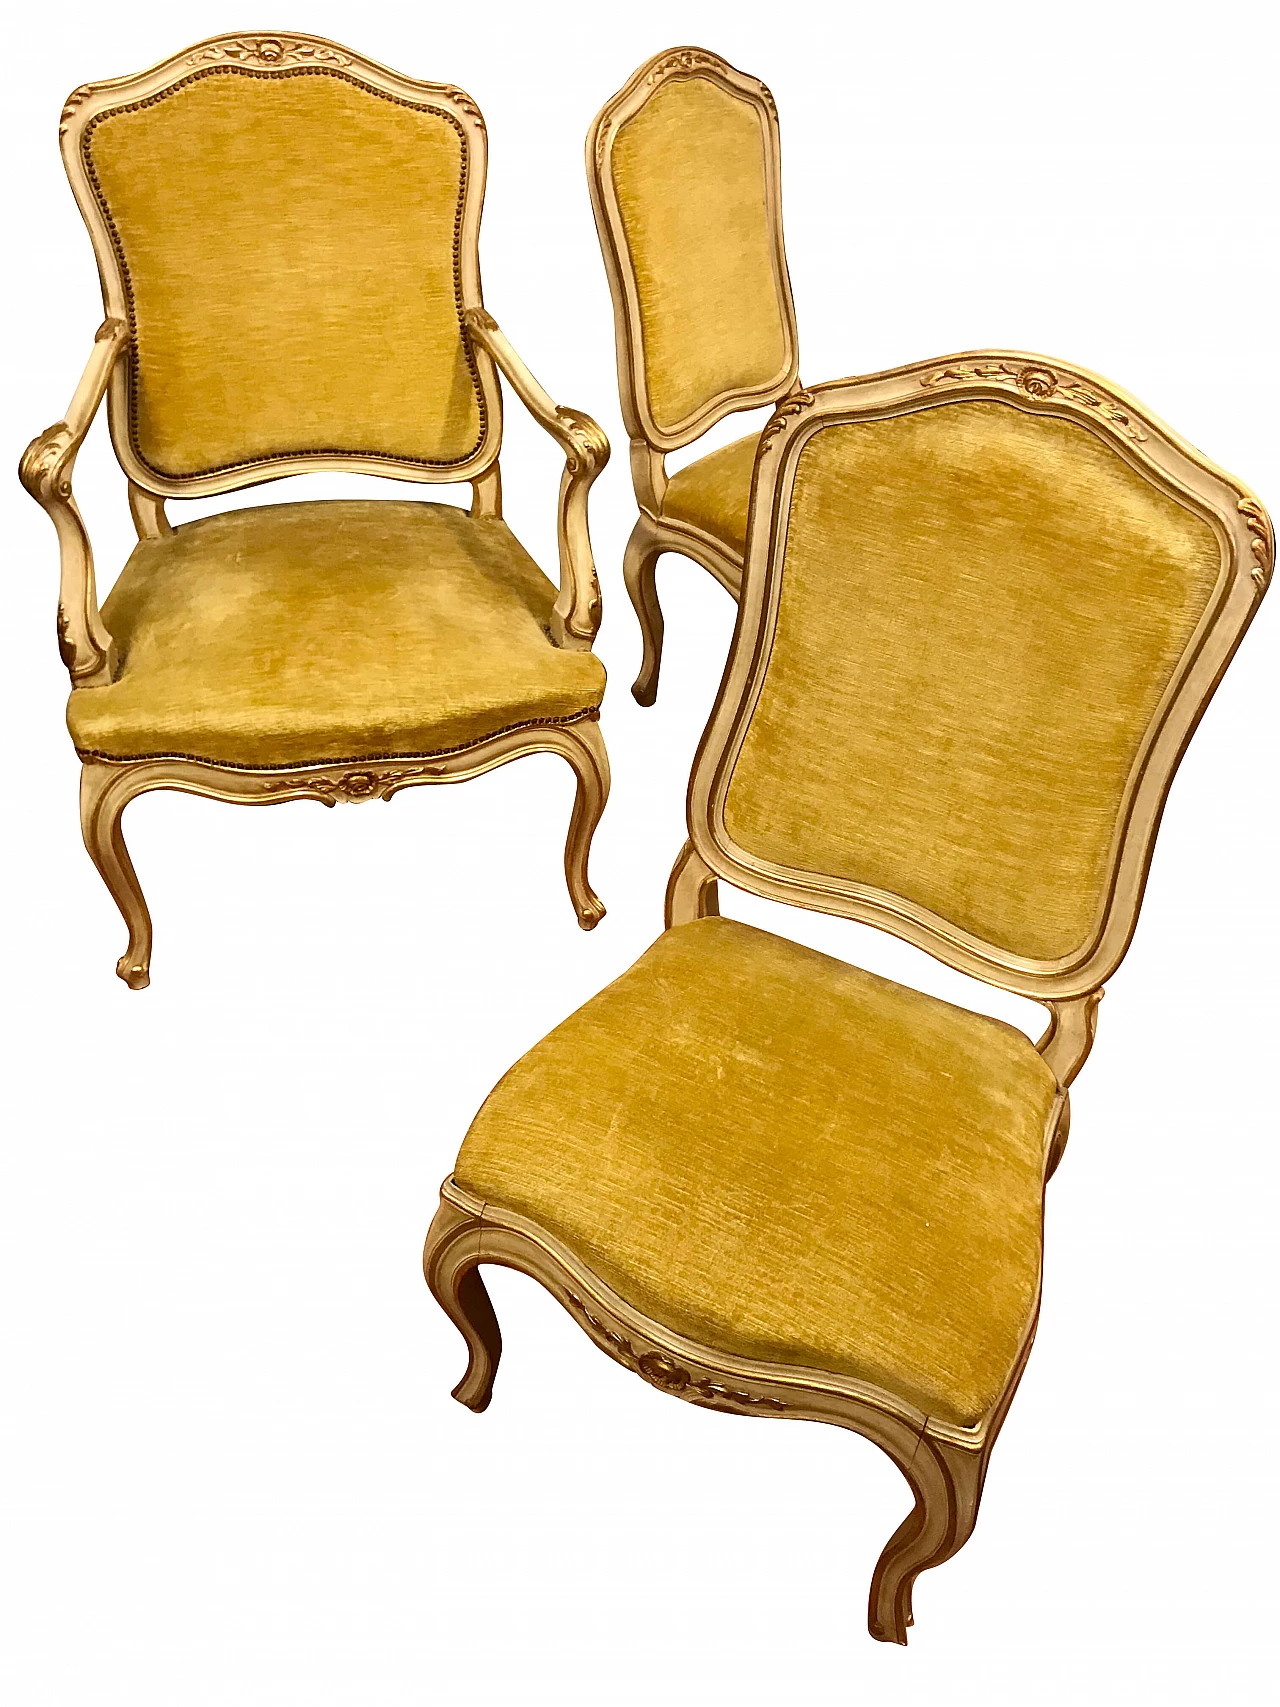 Set of 1 armchair and 2 lacquered and gilded chairs lined with gold-colored velvet, original mid 20th century 1222525